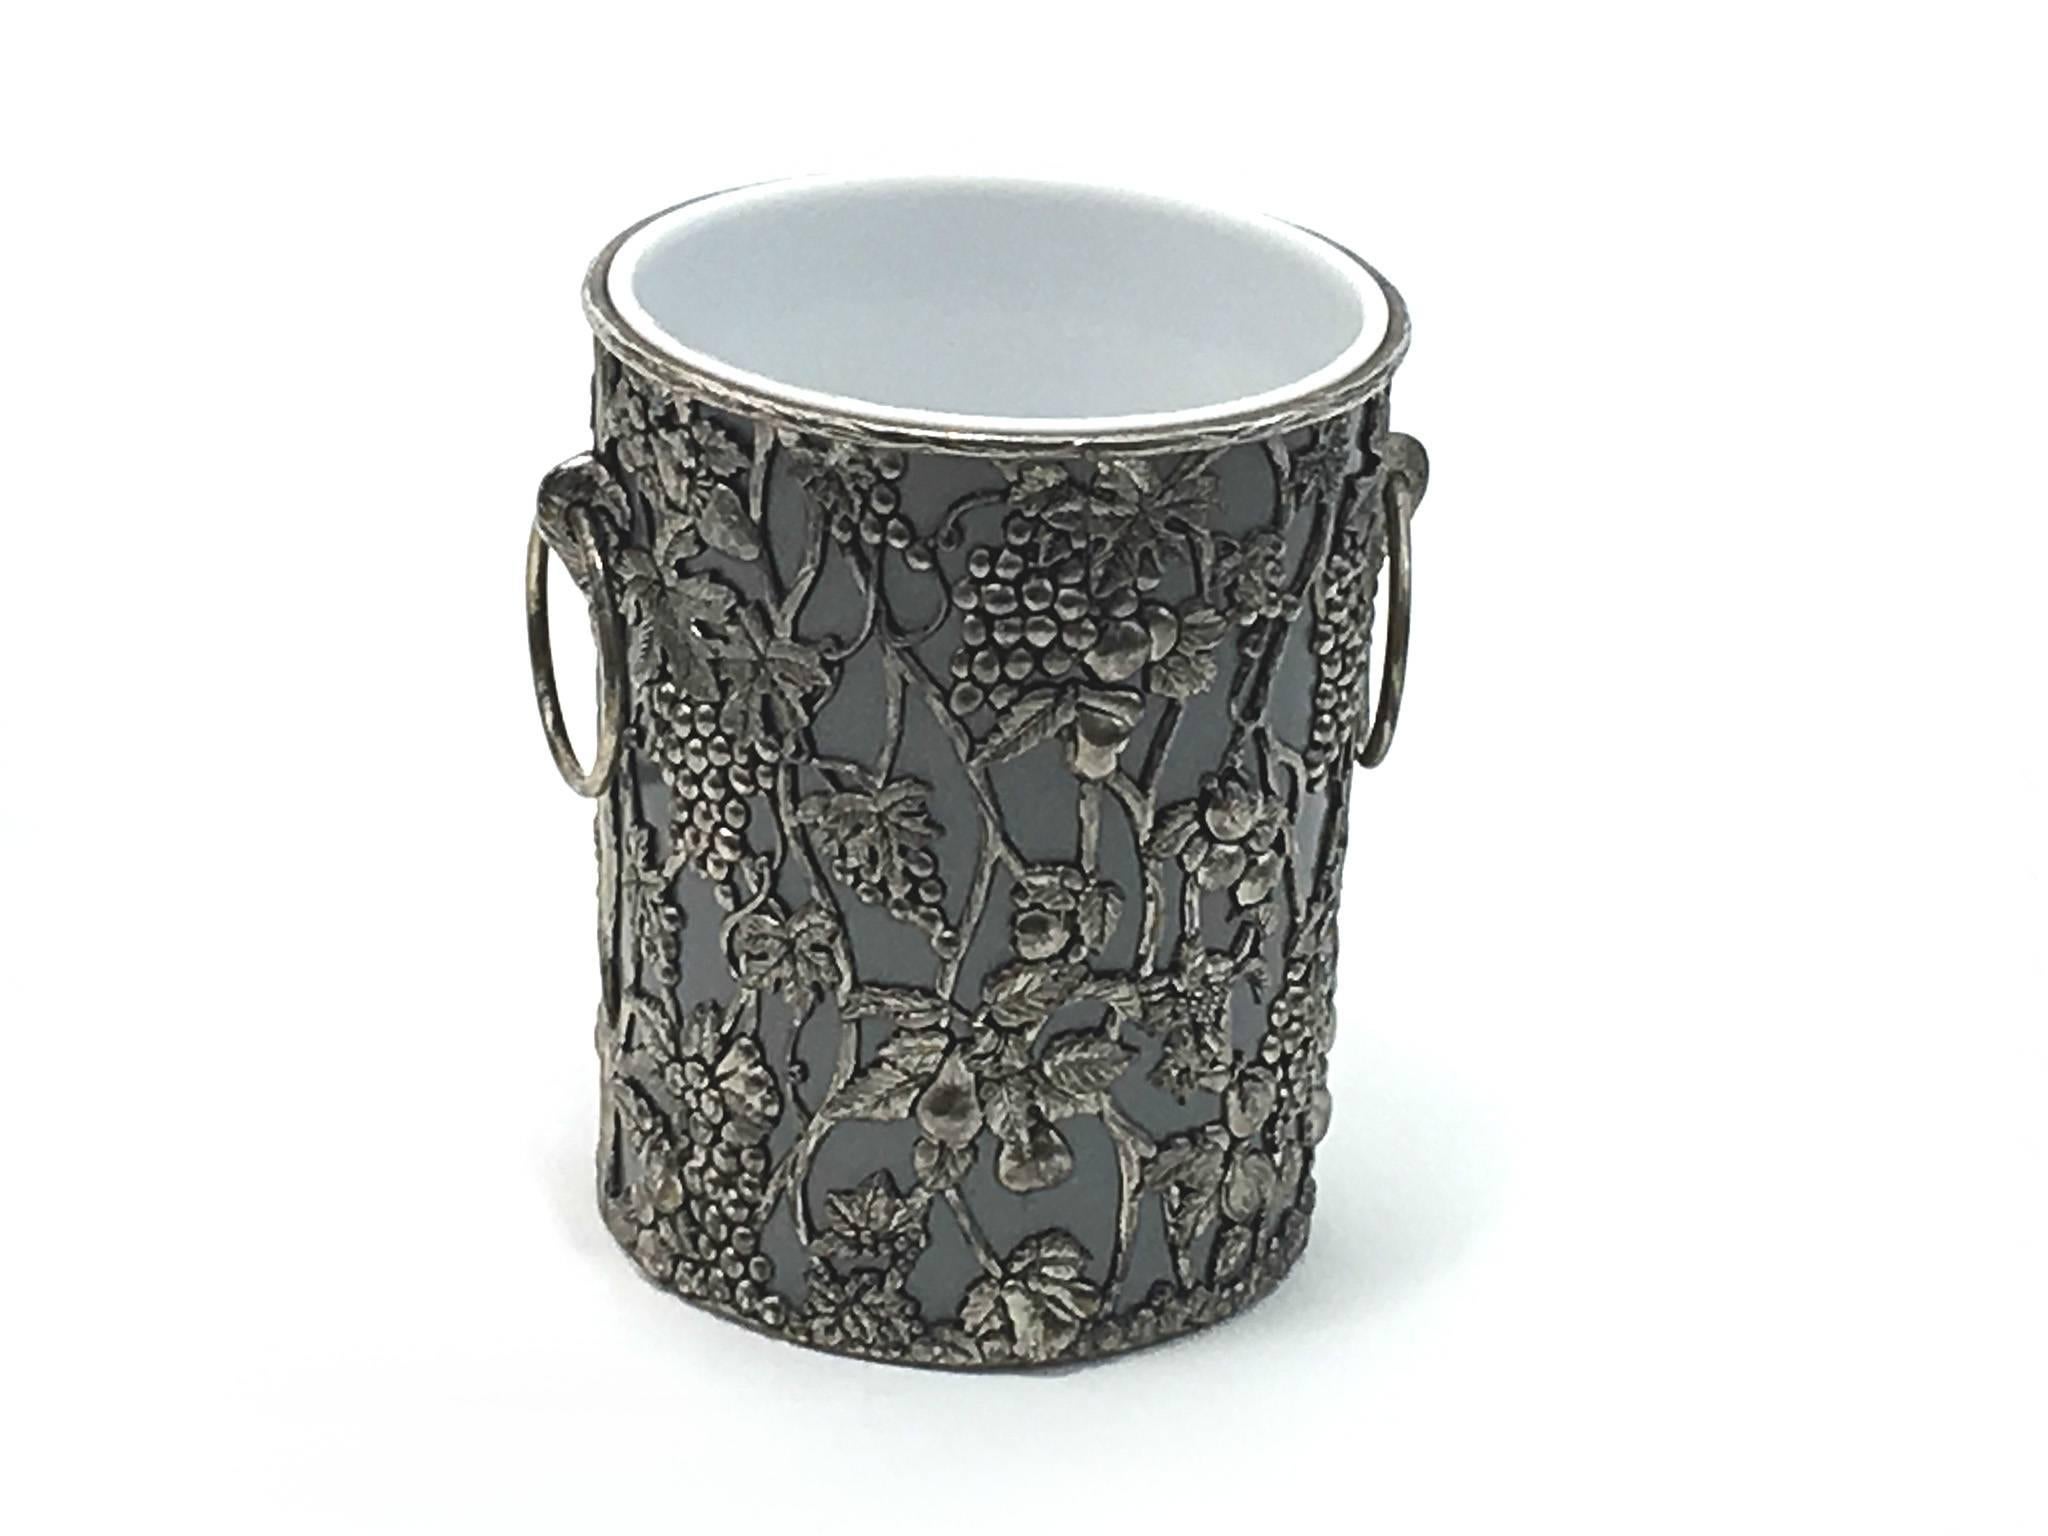 Champagne bucket with silvered colored floral decor frame.
Champagne cooler.
Ice bucket.